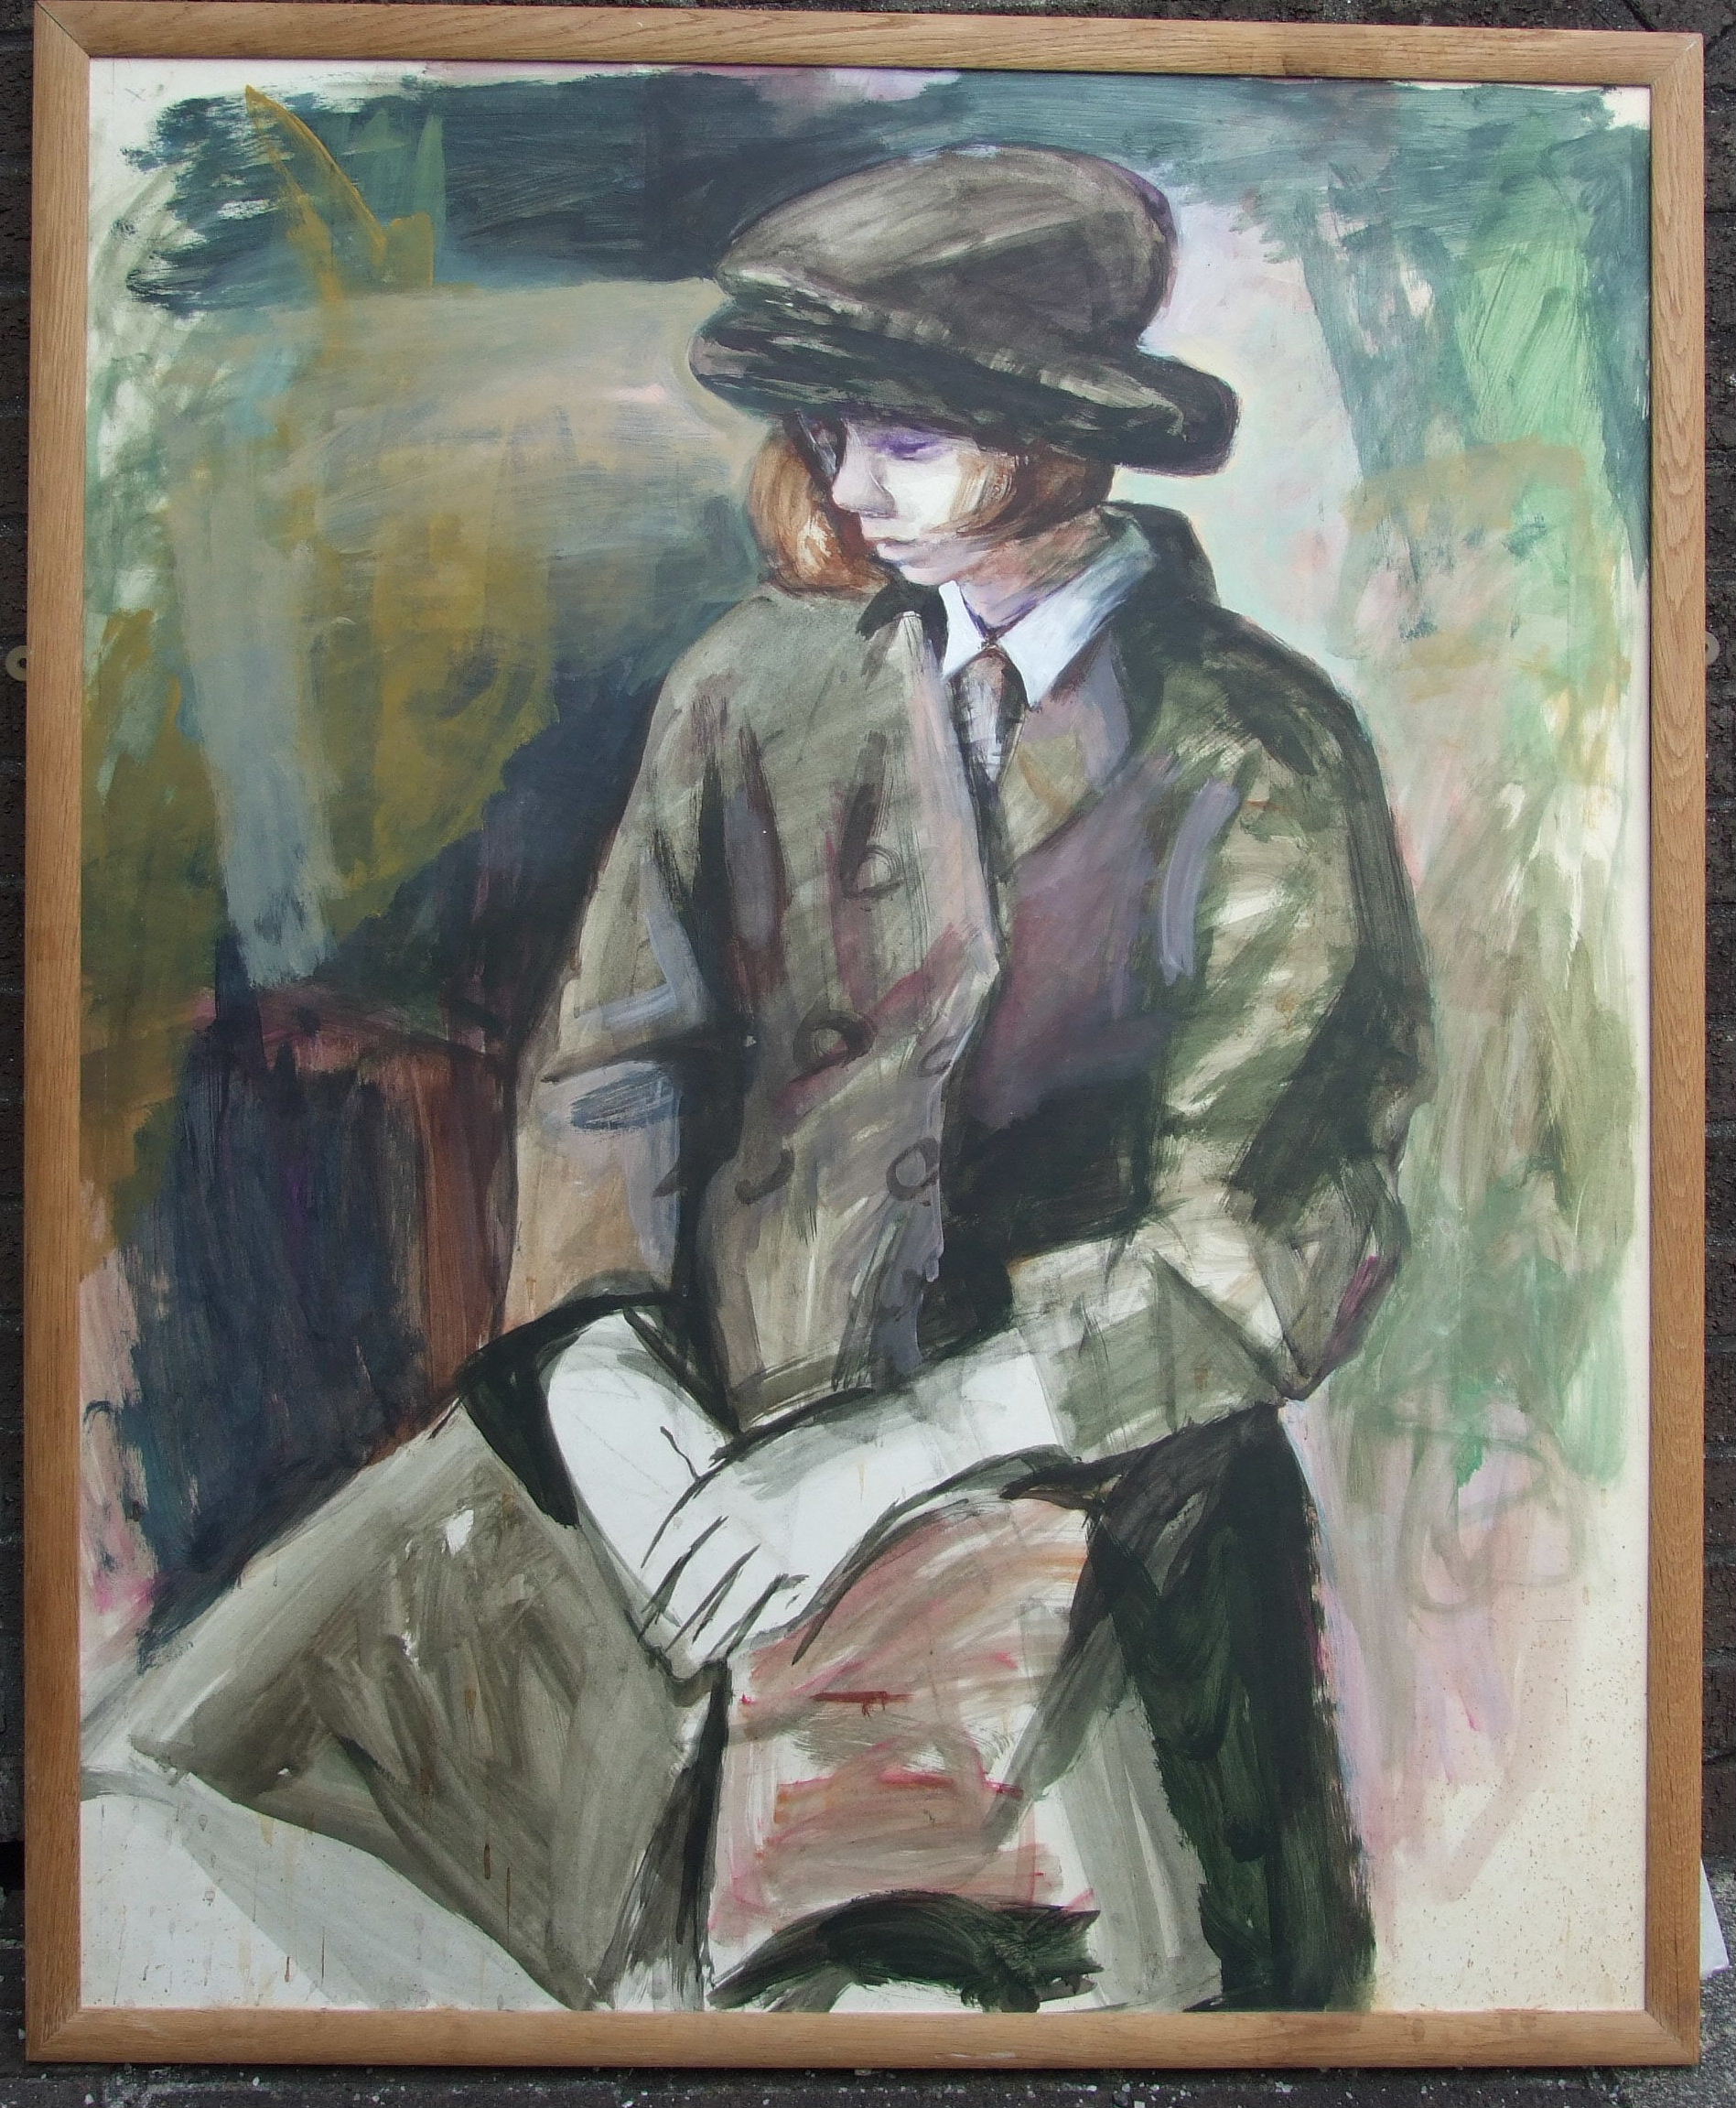 Noel George Ellis (1917-1998) A STUDY OF A YOUNG GIRL WEARING A HAT AND A GREEN COAT Acrylic on